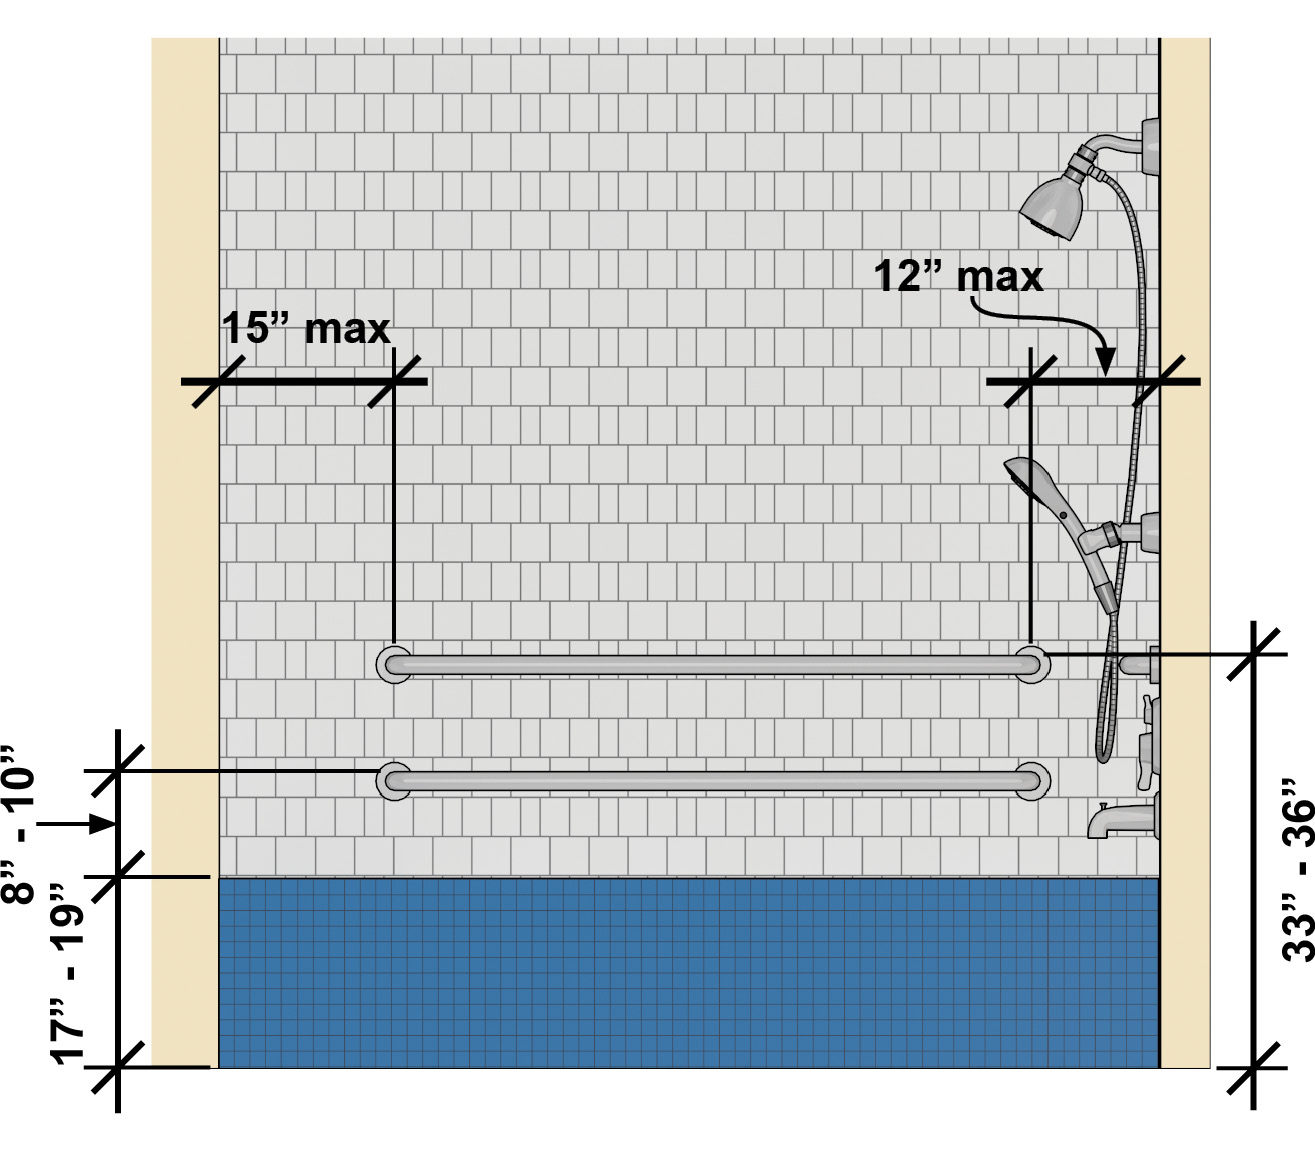 Tub with permanent seat and parallel grab bars on the back wall that
extend 12" max. from the control wall and 15" max. from the head end
wall. One bar is 33" -- 36" high and the other is 8" -- 10" above the
tub rim. The height of the seat is 17" -- 19."